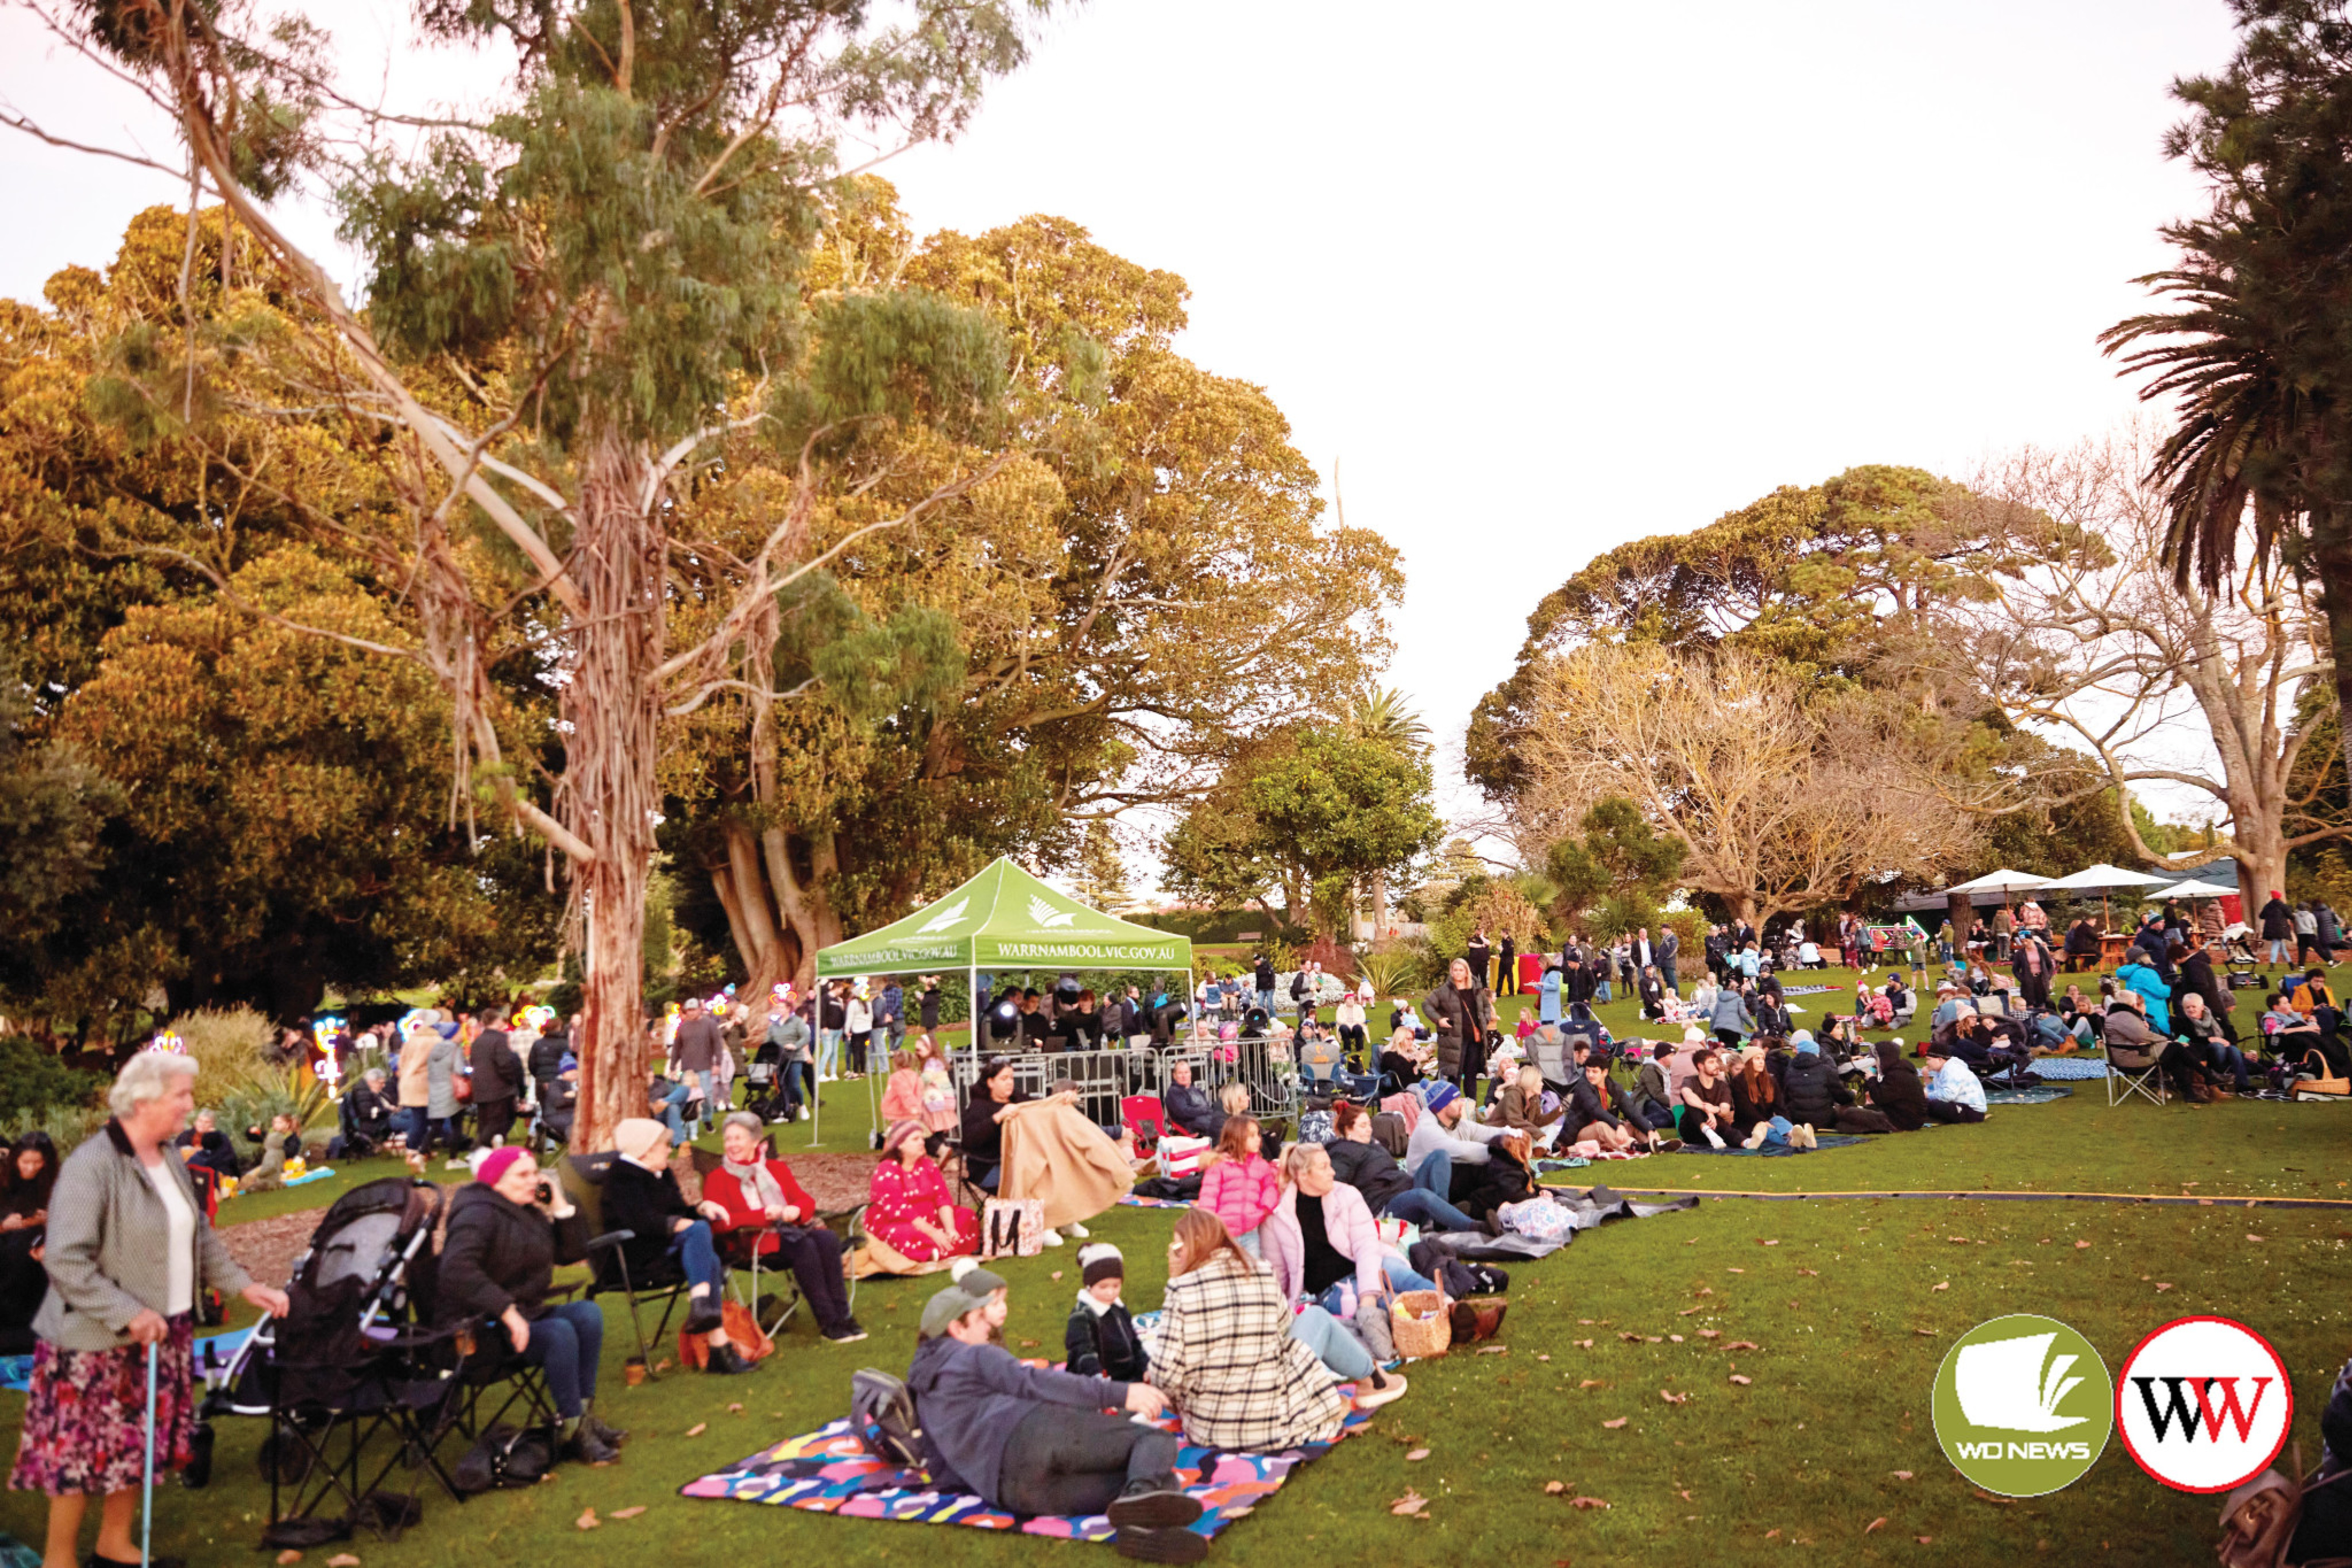 Last year’s Solstice attracted big crowds to the Botanic Gardens. The event has been moved to Lake Pertobe